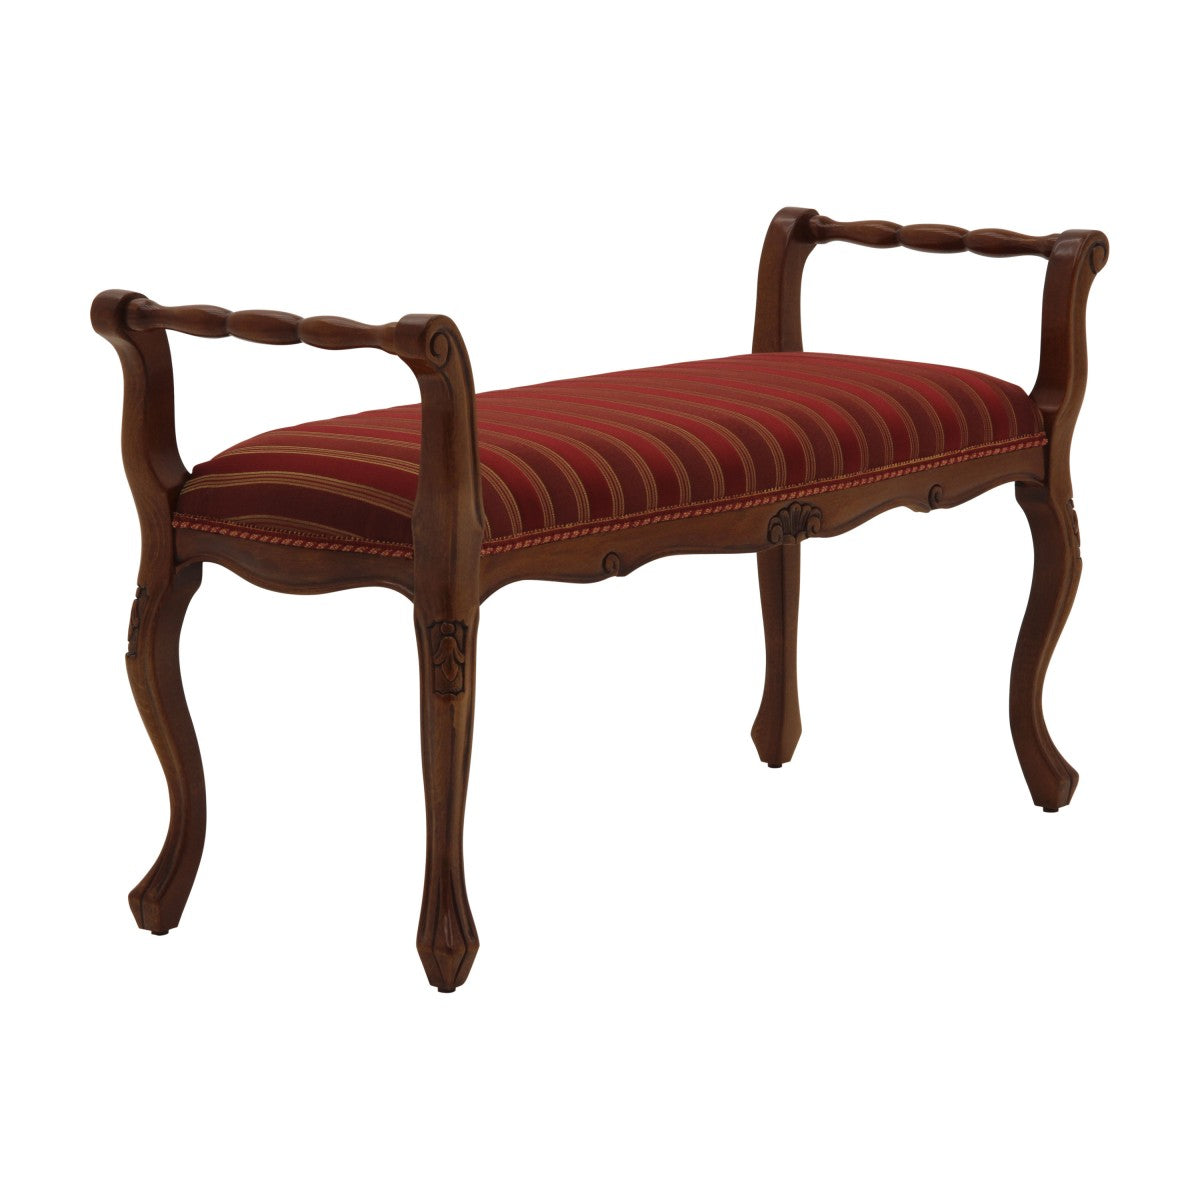 Onda Bespoke Upholstered French Carved Scroll Arm Bench MS132Q Custom Made To Order